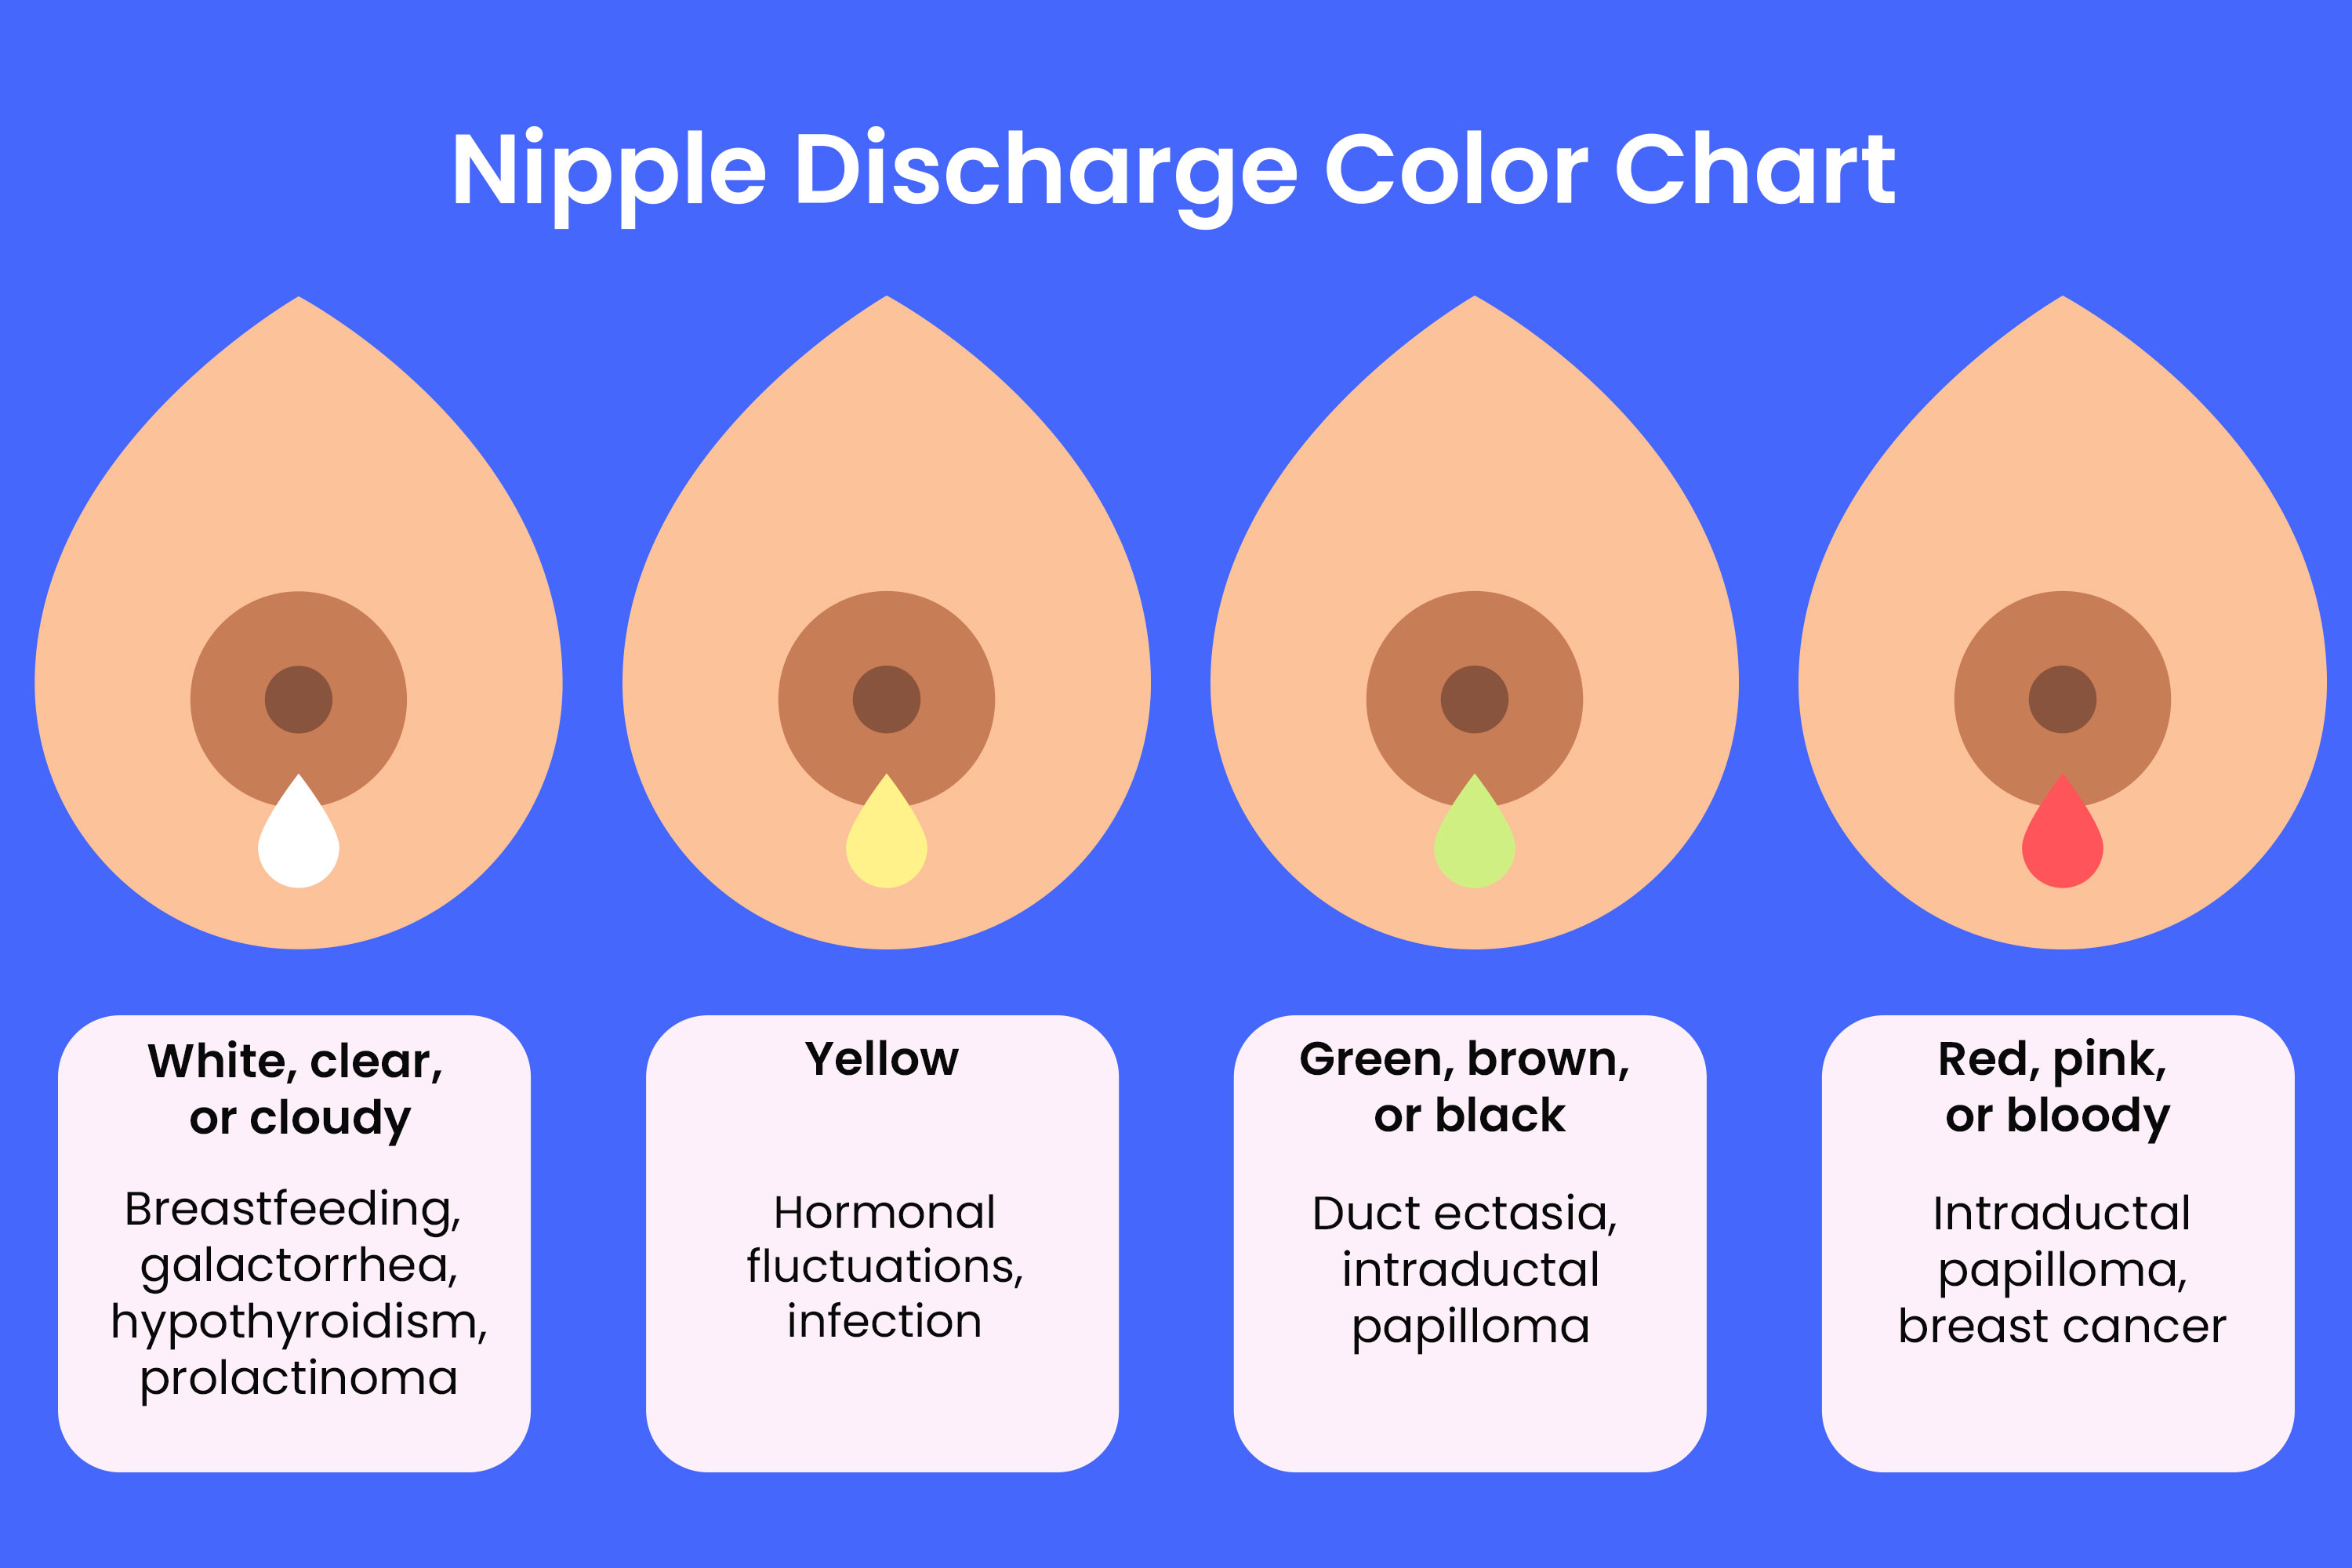 Sagging Breasts Causes, Treatment, and Prevention